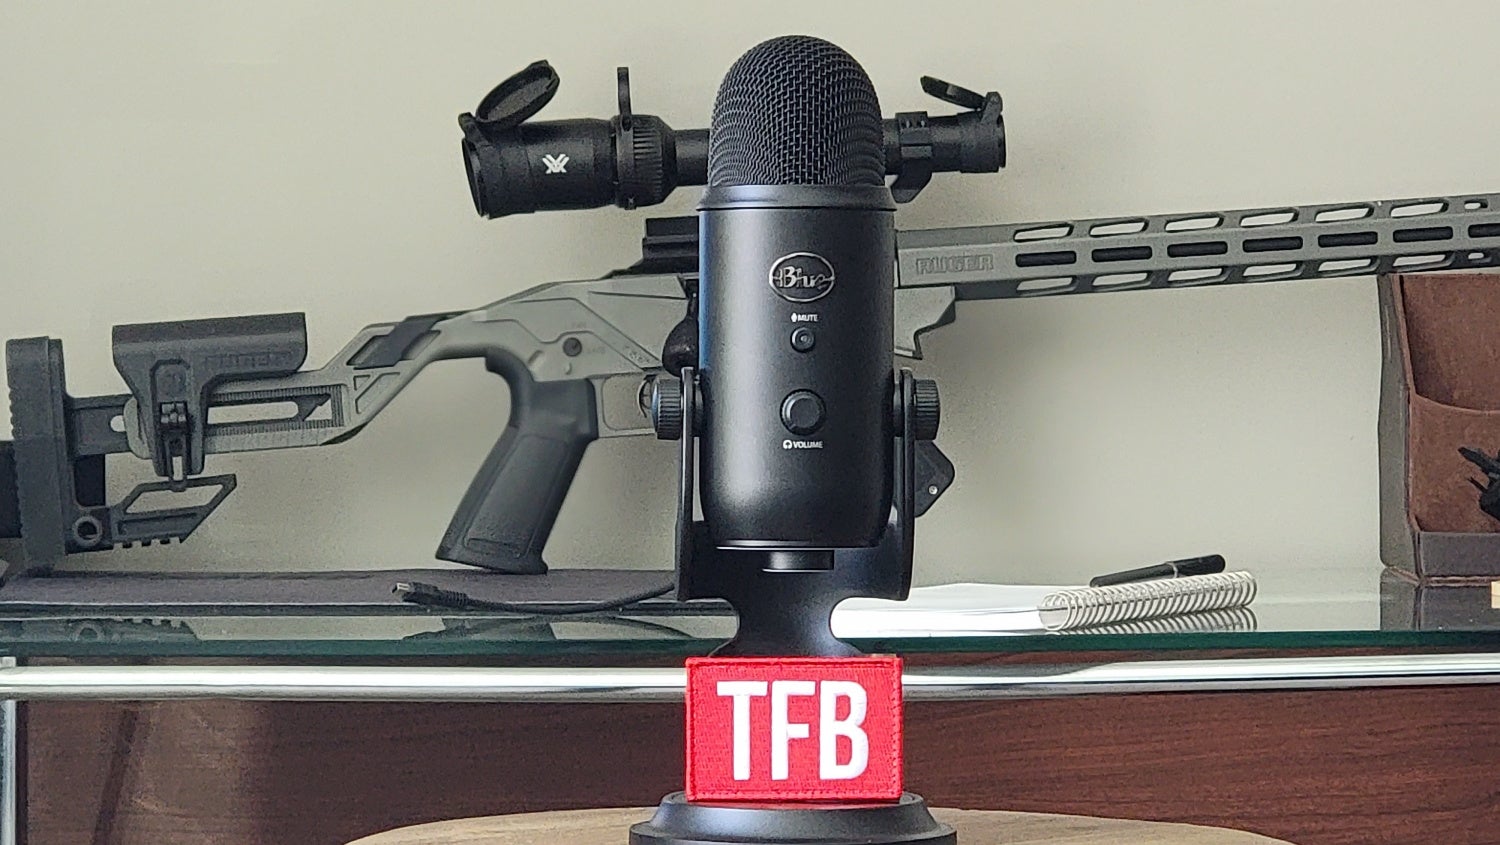 TFB Podcast Roundup 80: More Podcasts for The Office Chair Jockey